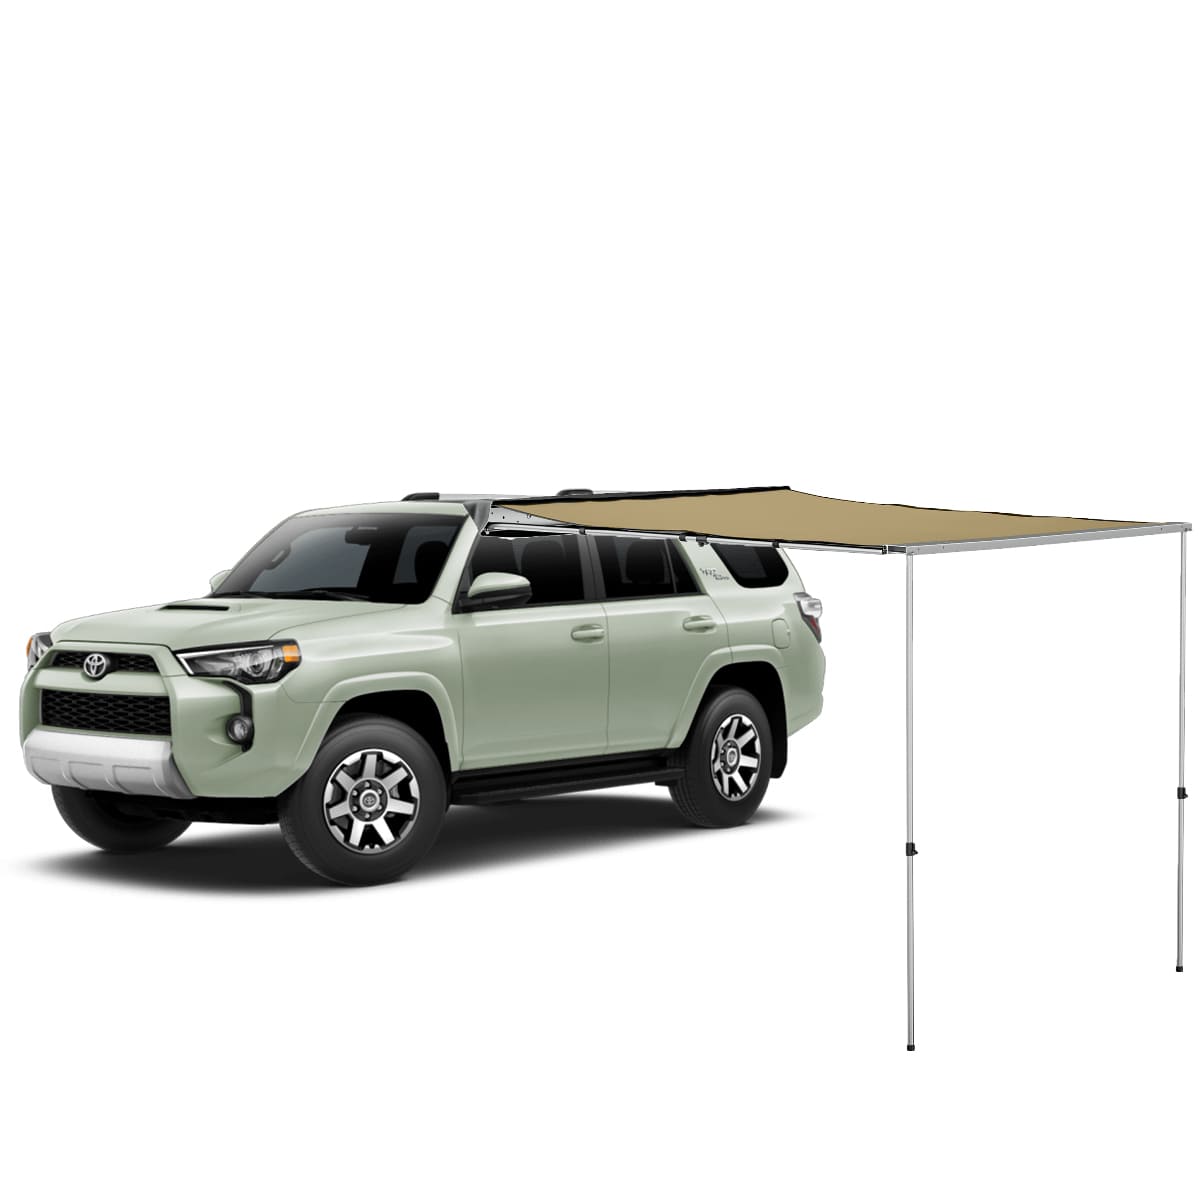 Side Awning 250x250cm, khaki, Awnings, Roof Tent + Awning